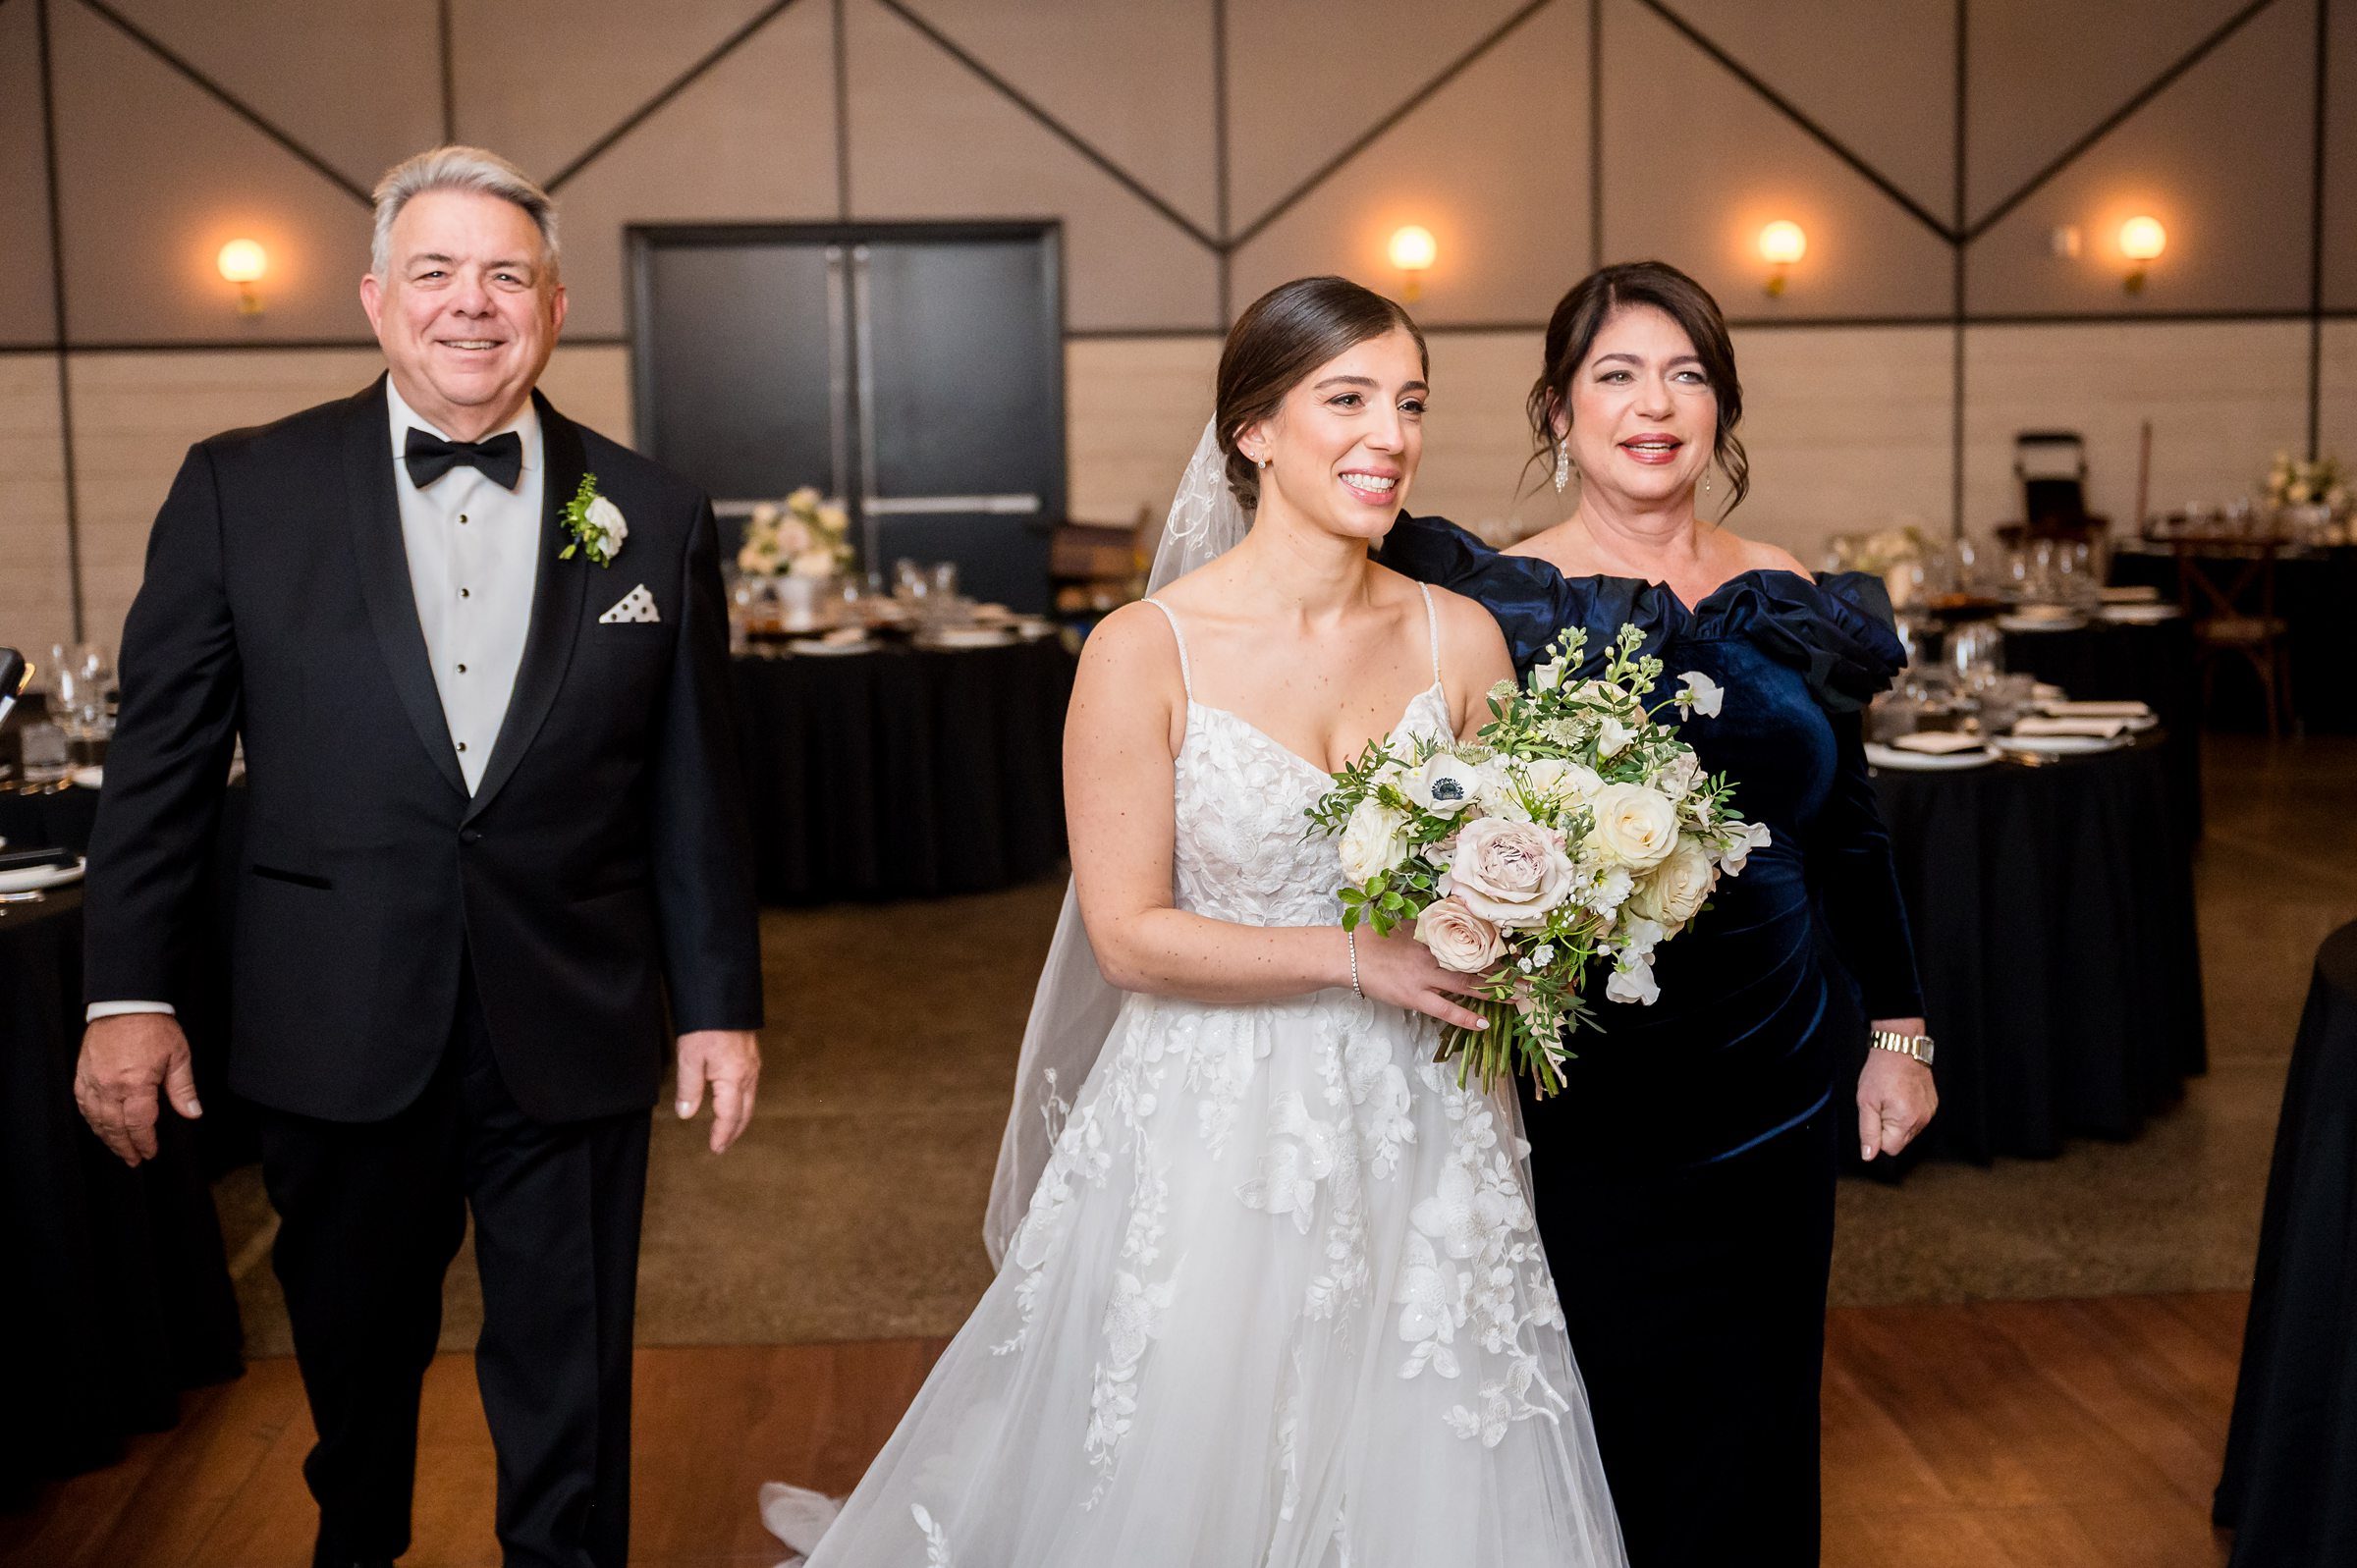 At a Lilah Events wedding, the bride gracefully walks down the aisle with her parents.